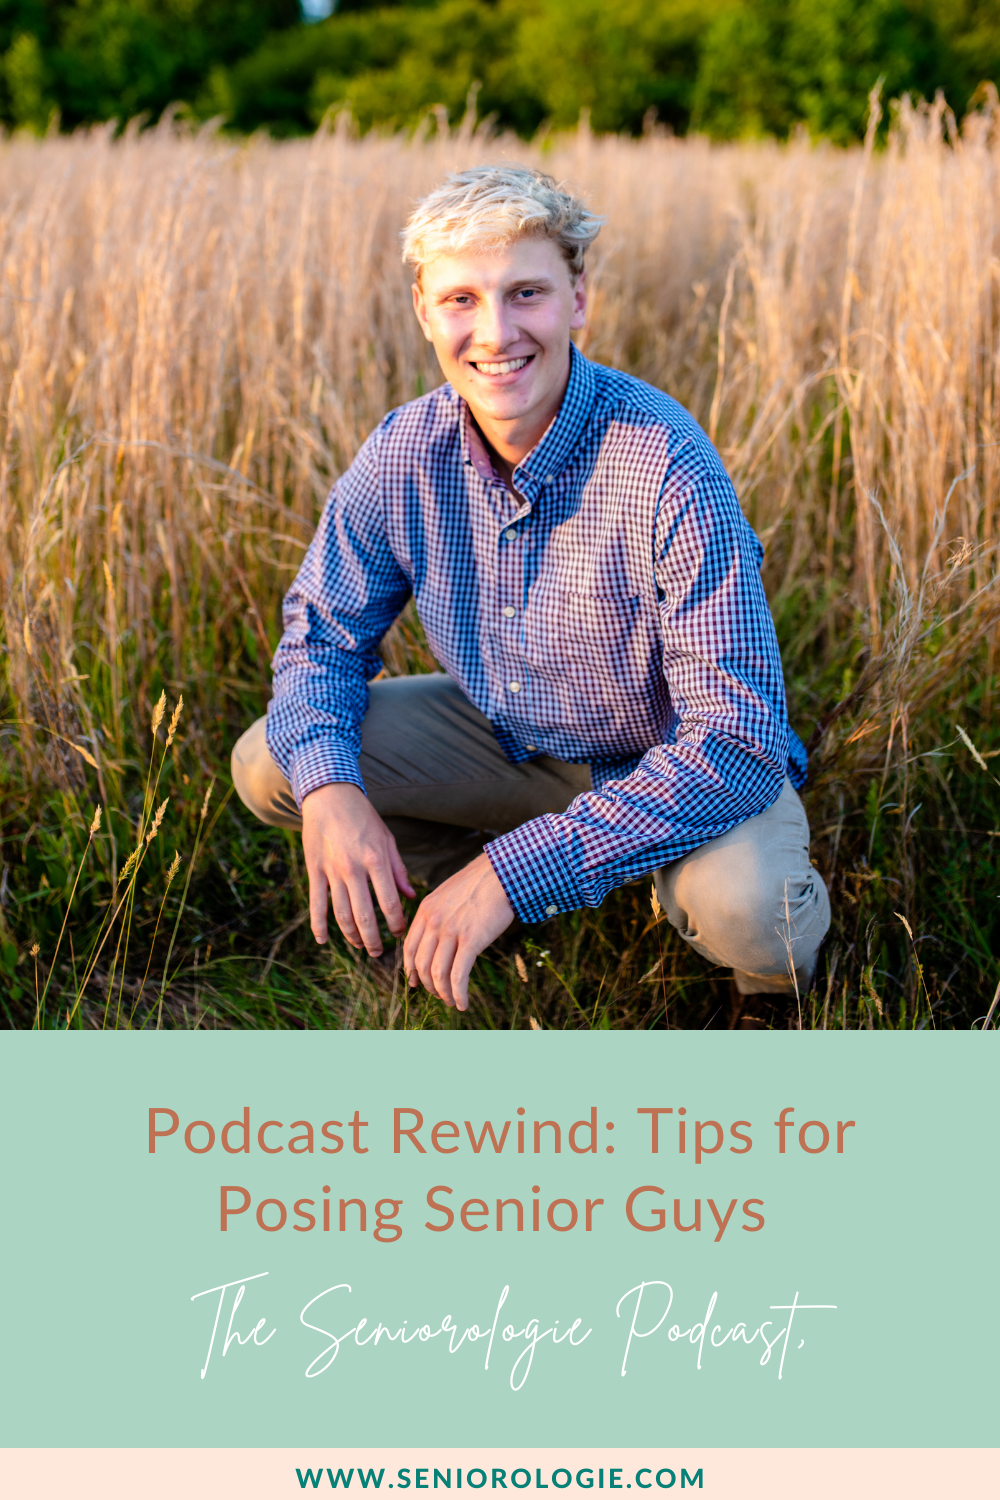 Tips for Posing Senior Guys: podcast rewind featuring tips for posing senior guys on the Seniorologie Podcast by Leslie Kerrigan